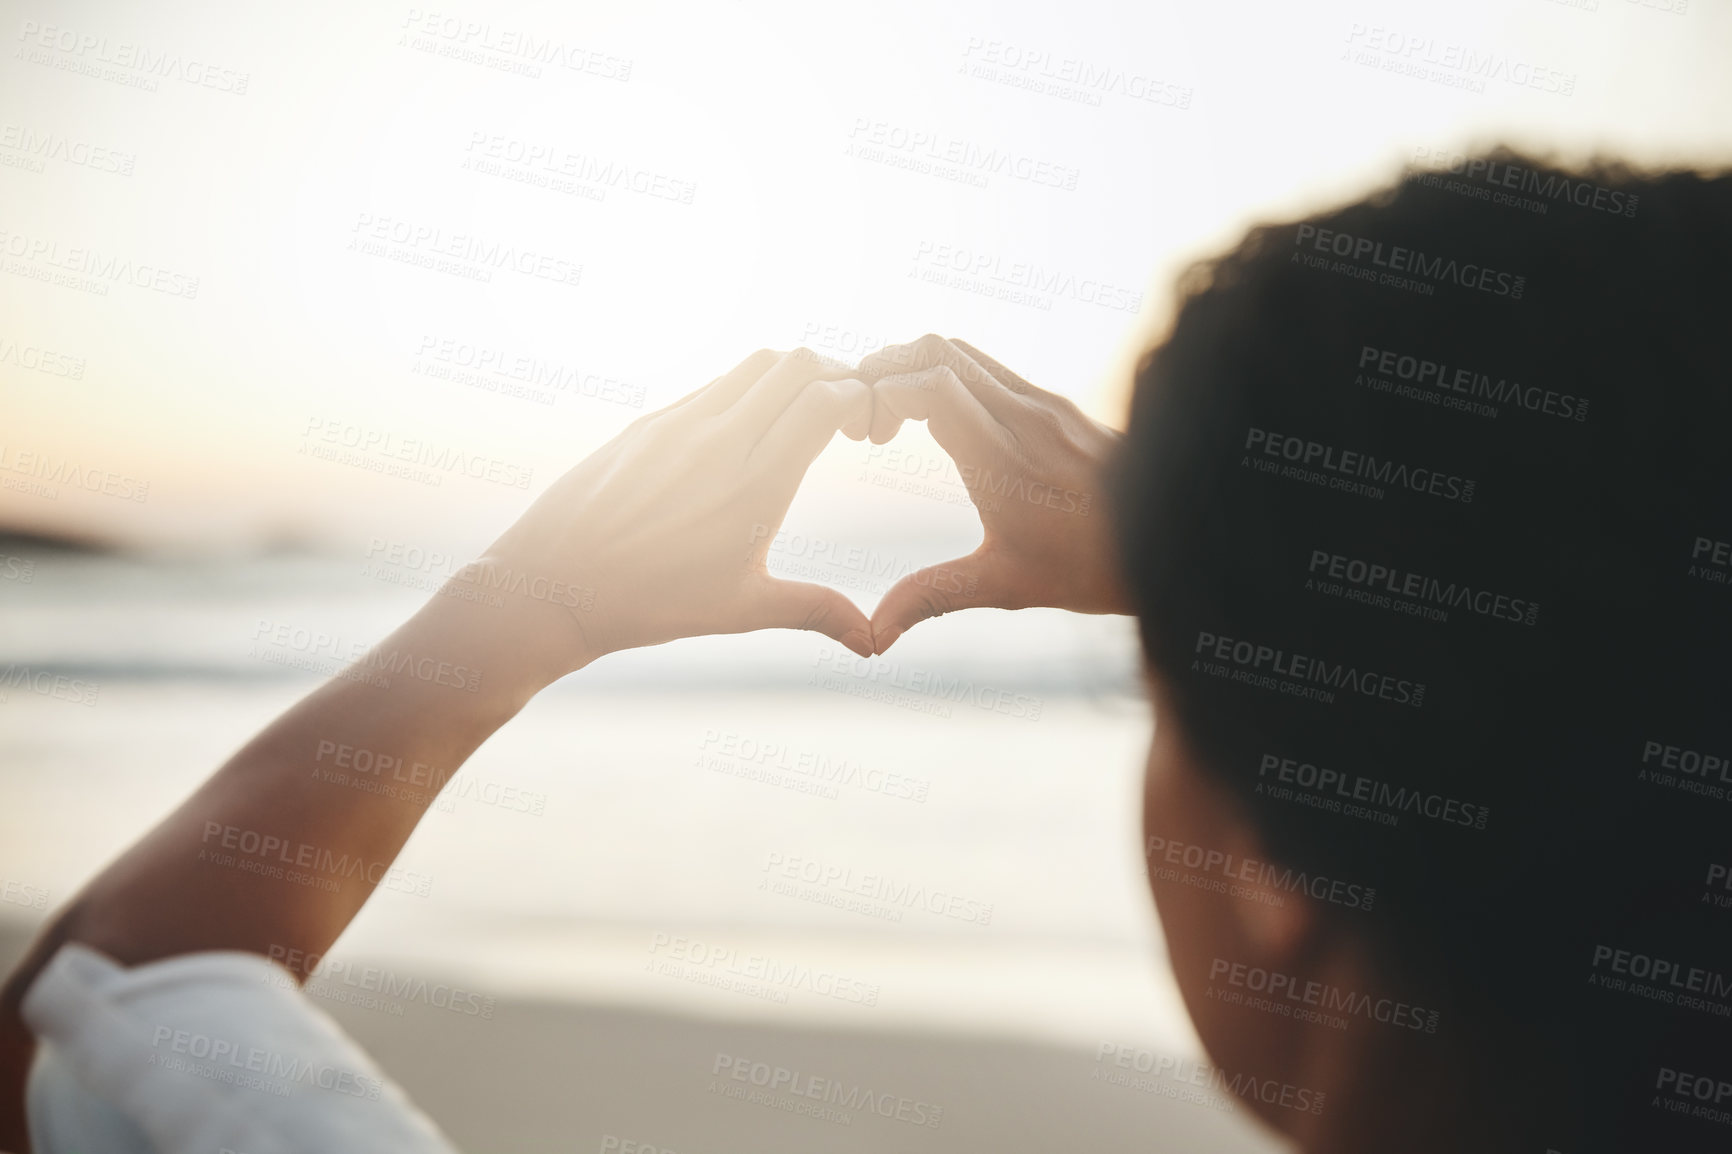 Buy stock photo Rearview shot of a woman woman forming a heart against the horizon at the beach